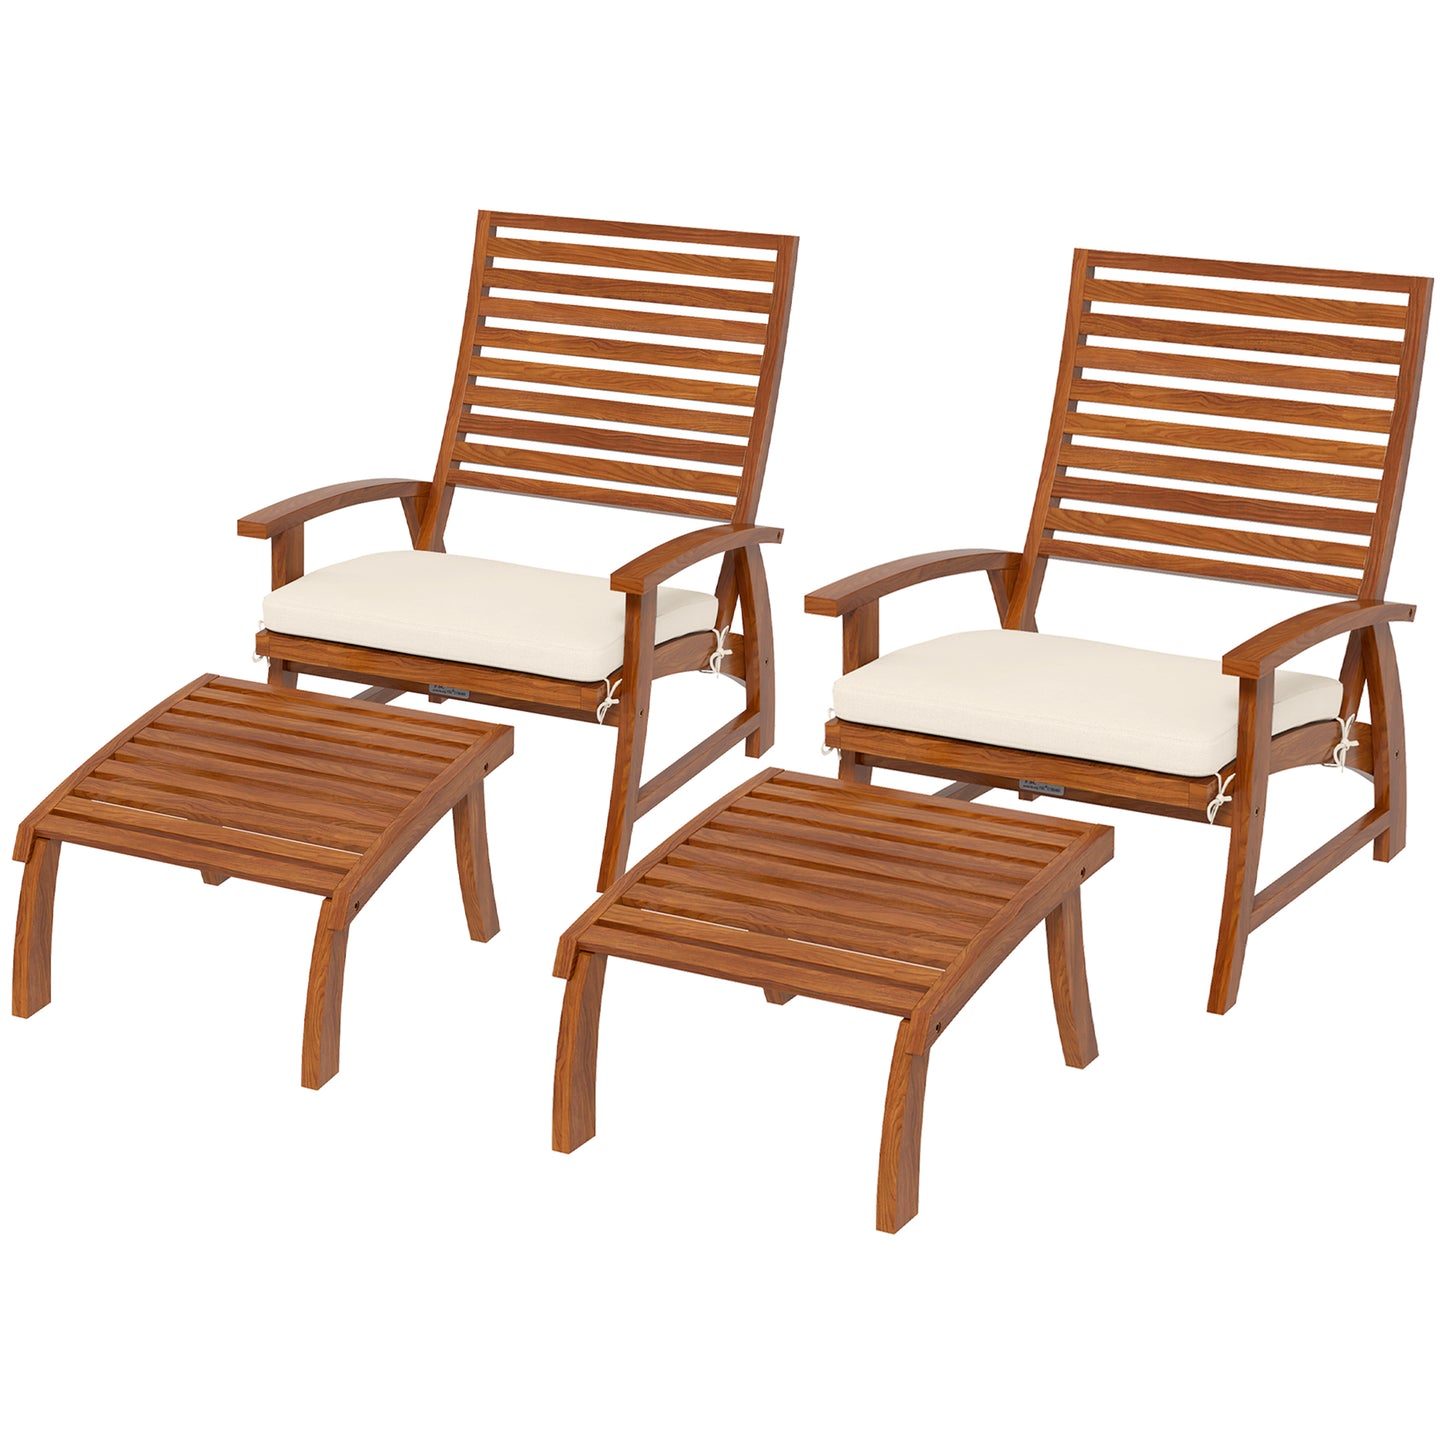 Outsunny 4 PCs Acacia Wood Dining Chairs Set of 4 with Footstool, Cream White